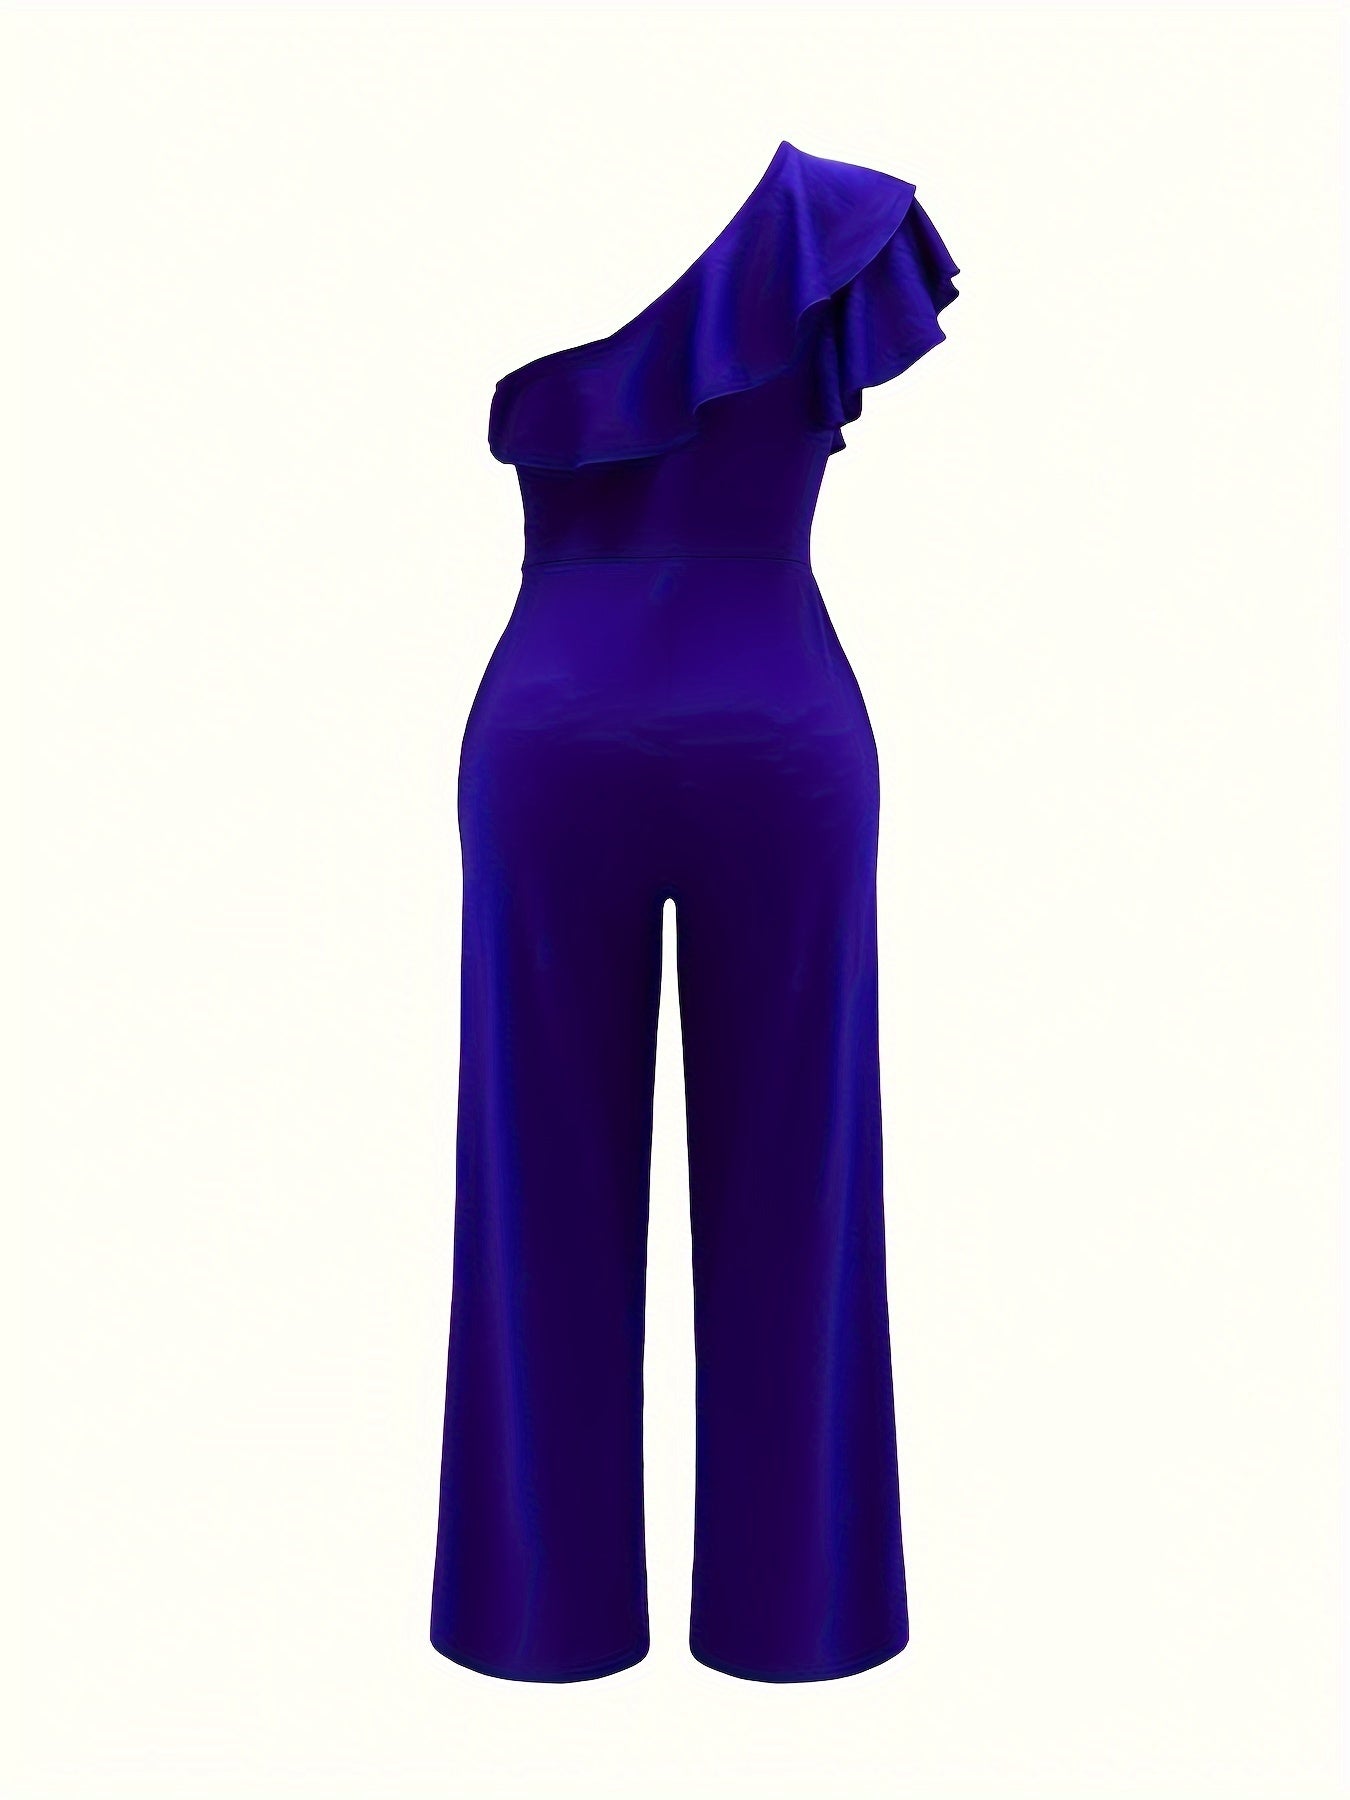 LLstyle Ruffle One Shoulder Jumpsuit